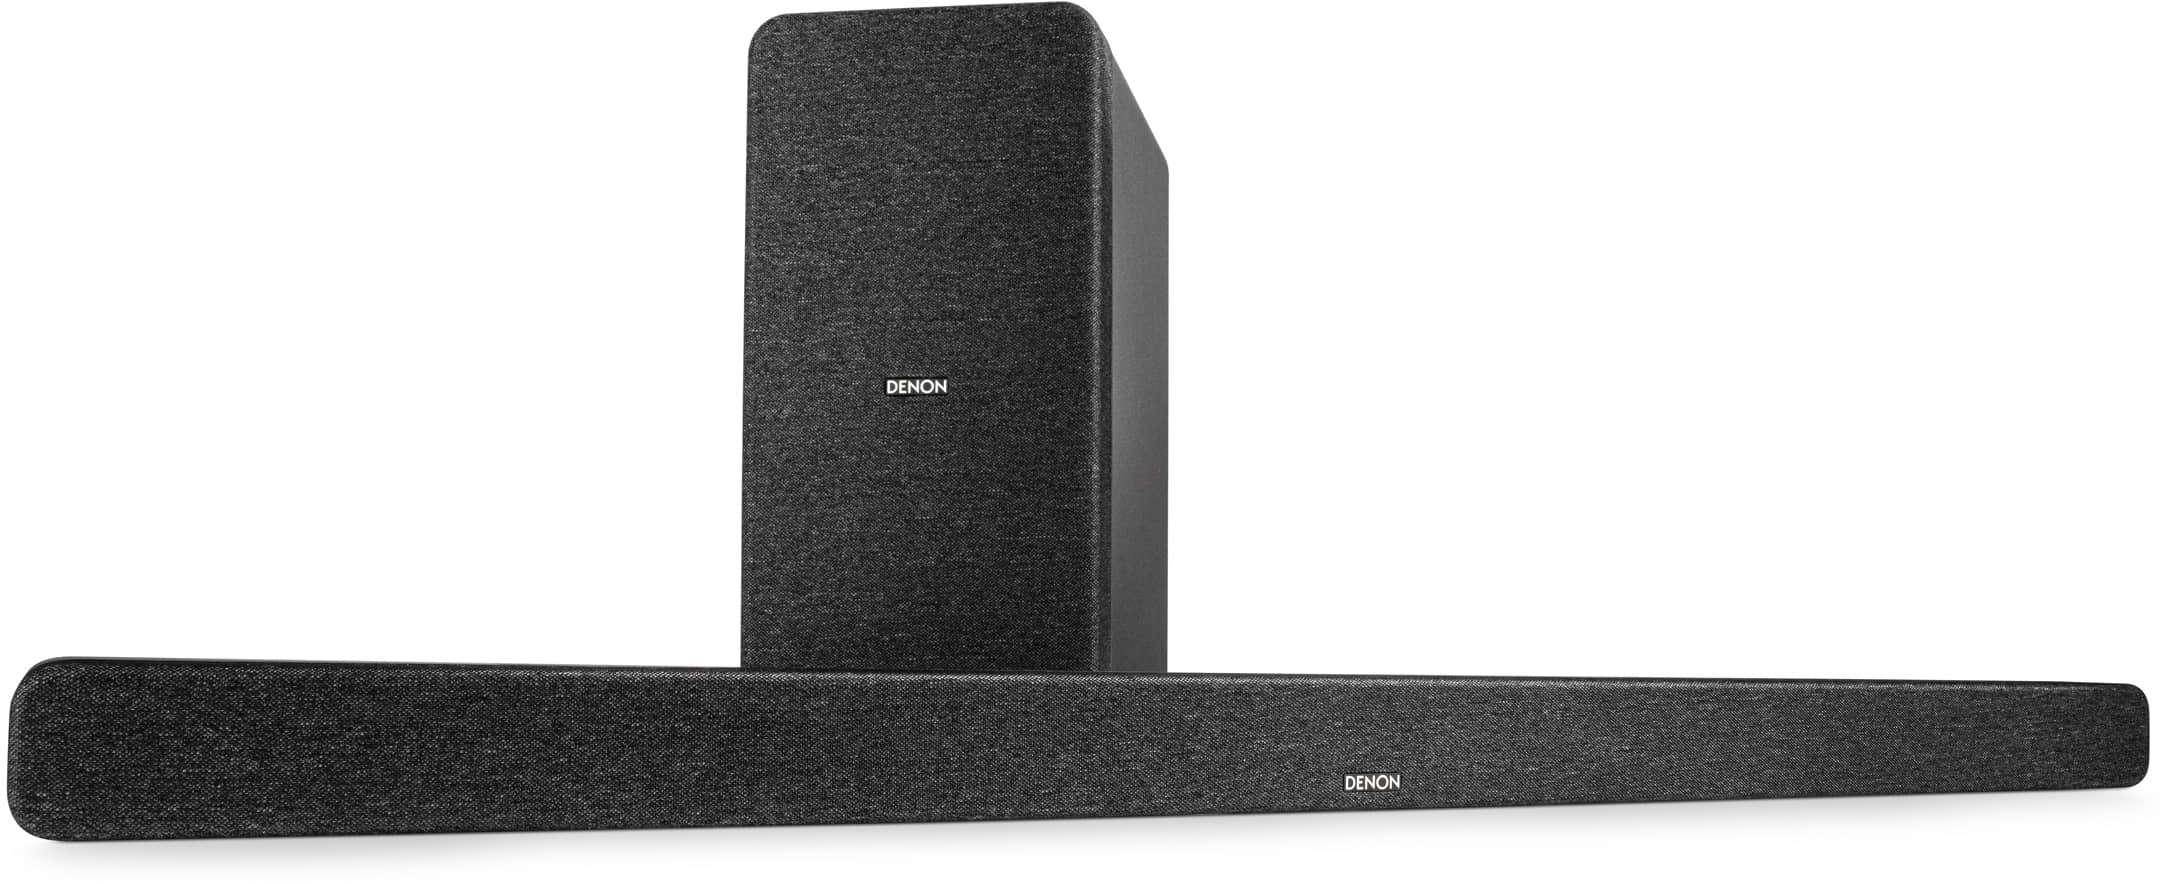 Denon DHT-S517 Dolby Atmos Soundbar with Wireless Subwoofer Speaker zoom image